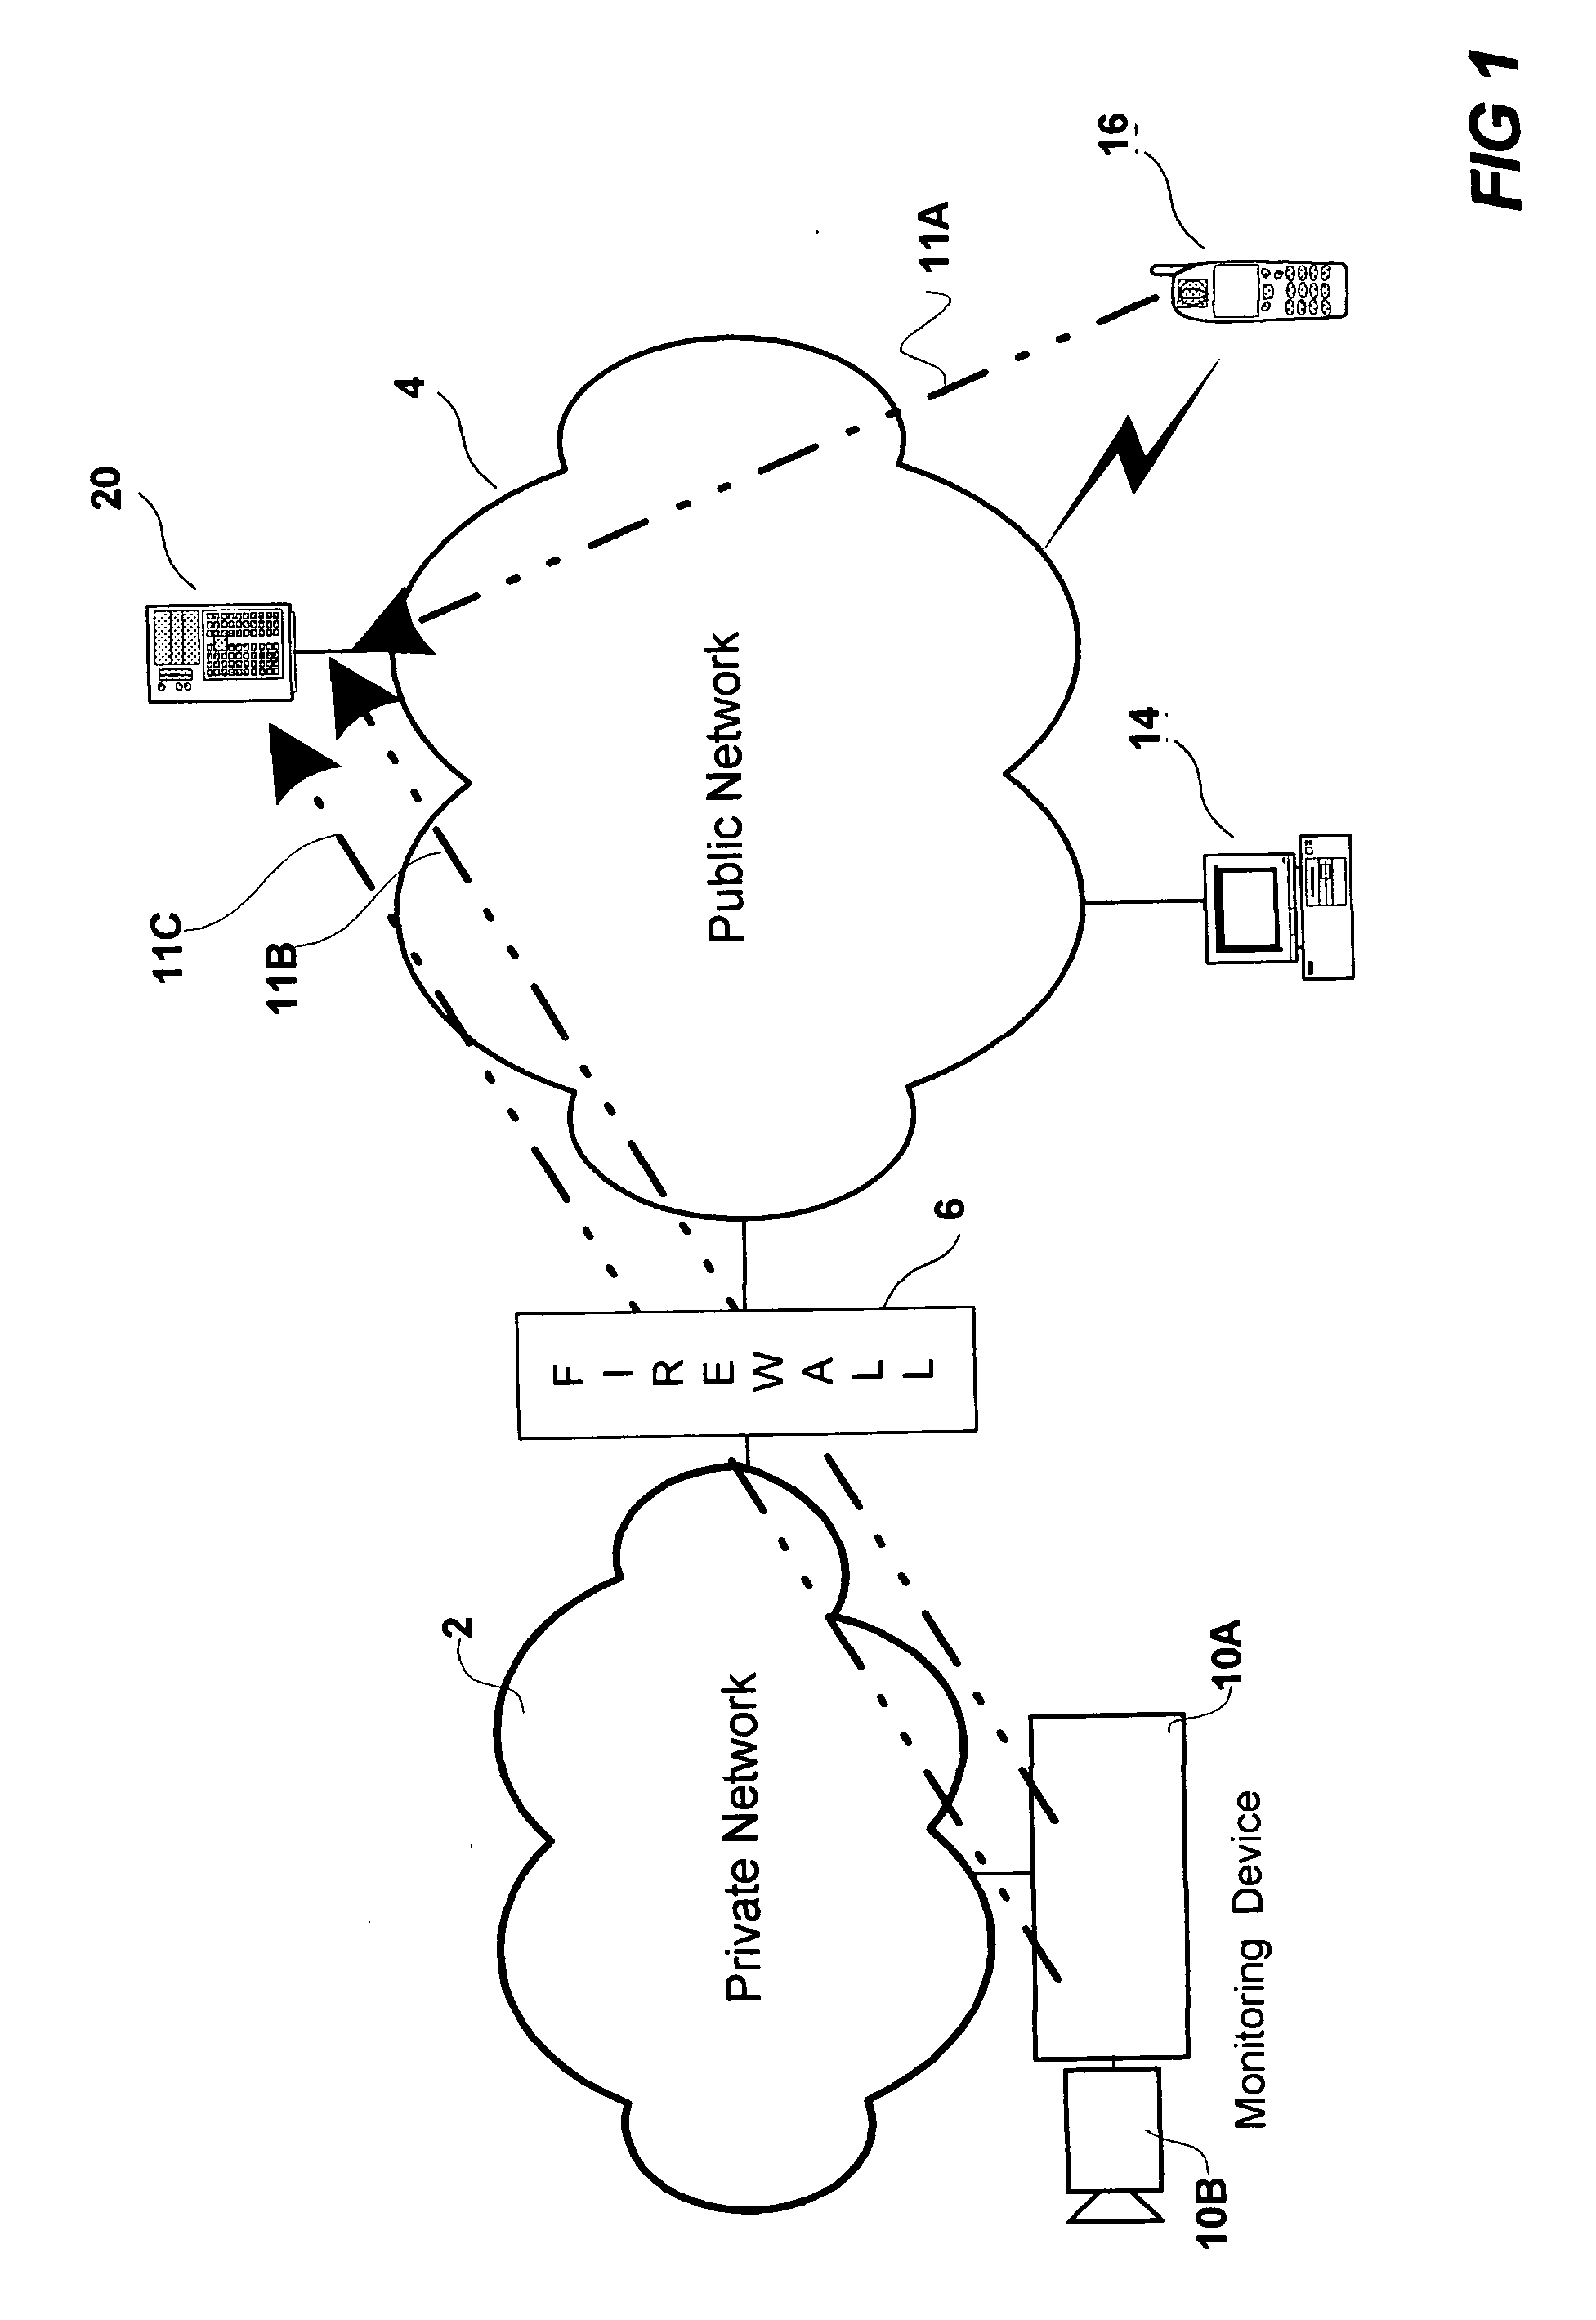 Method and apparatus for remote management of a monitoring system over the internet